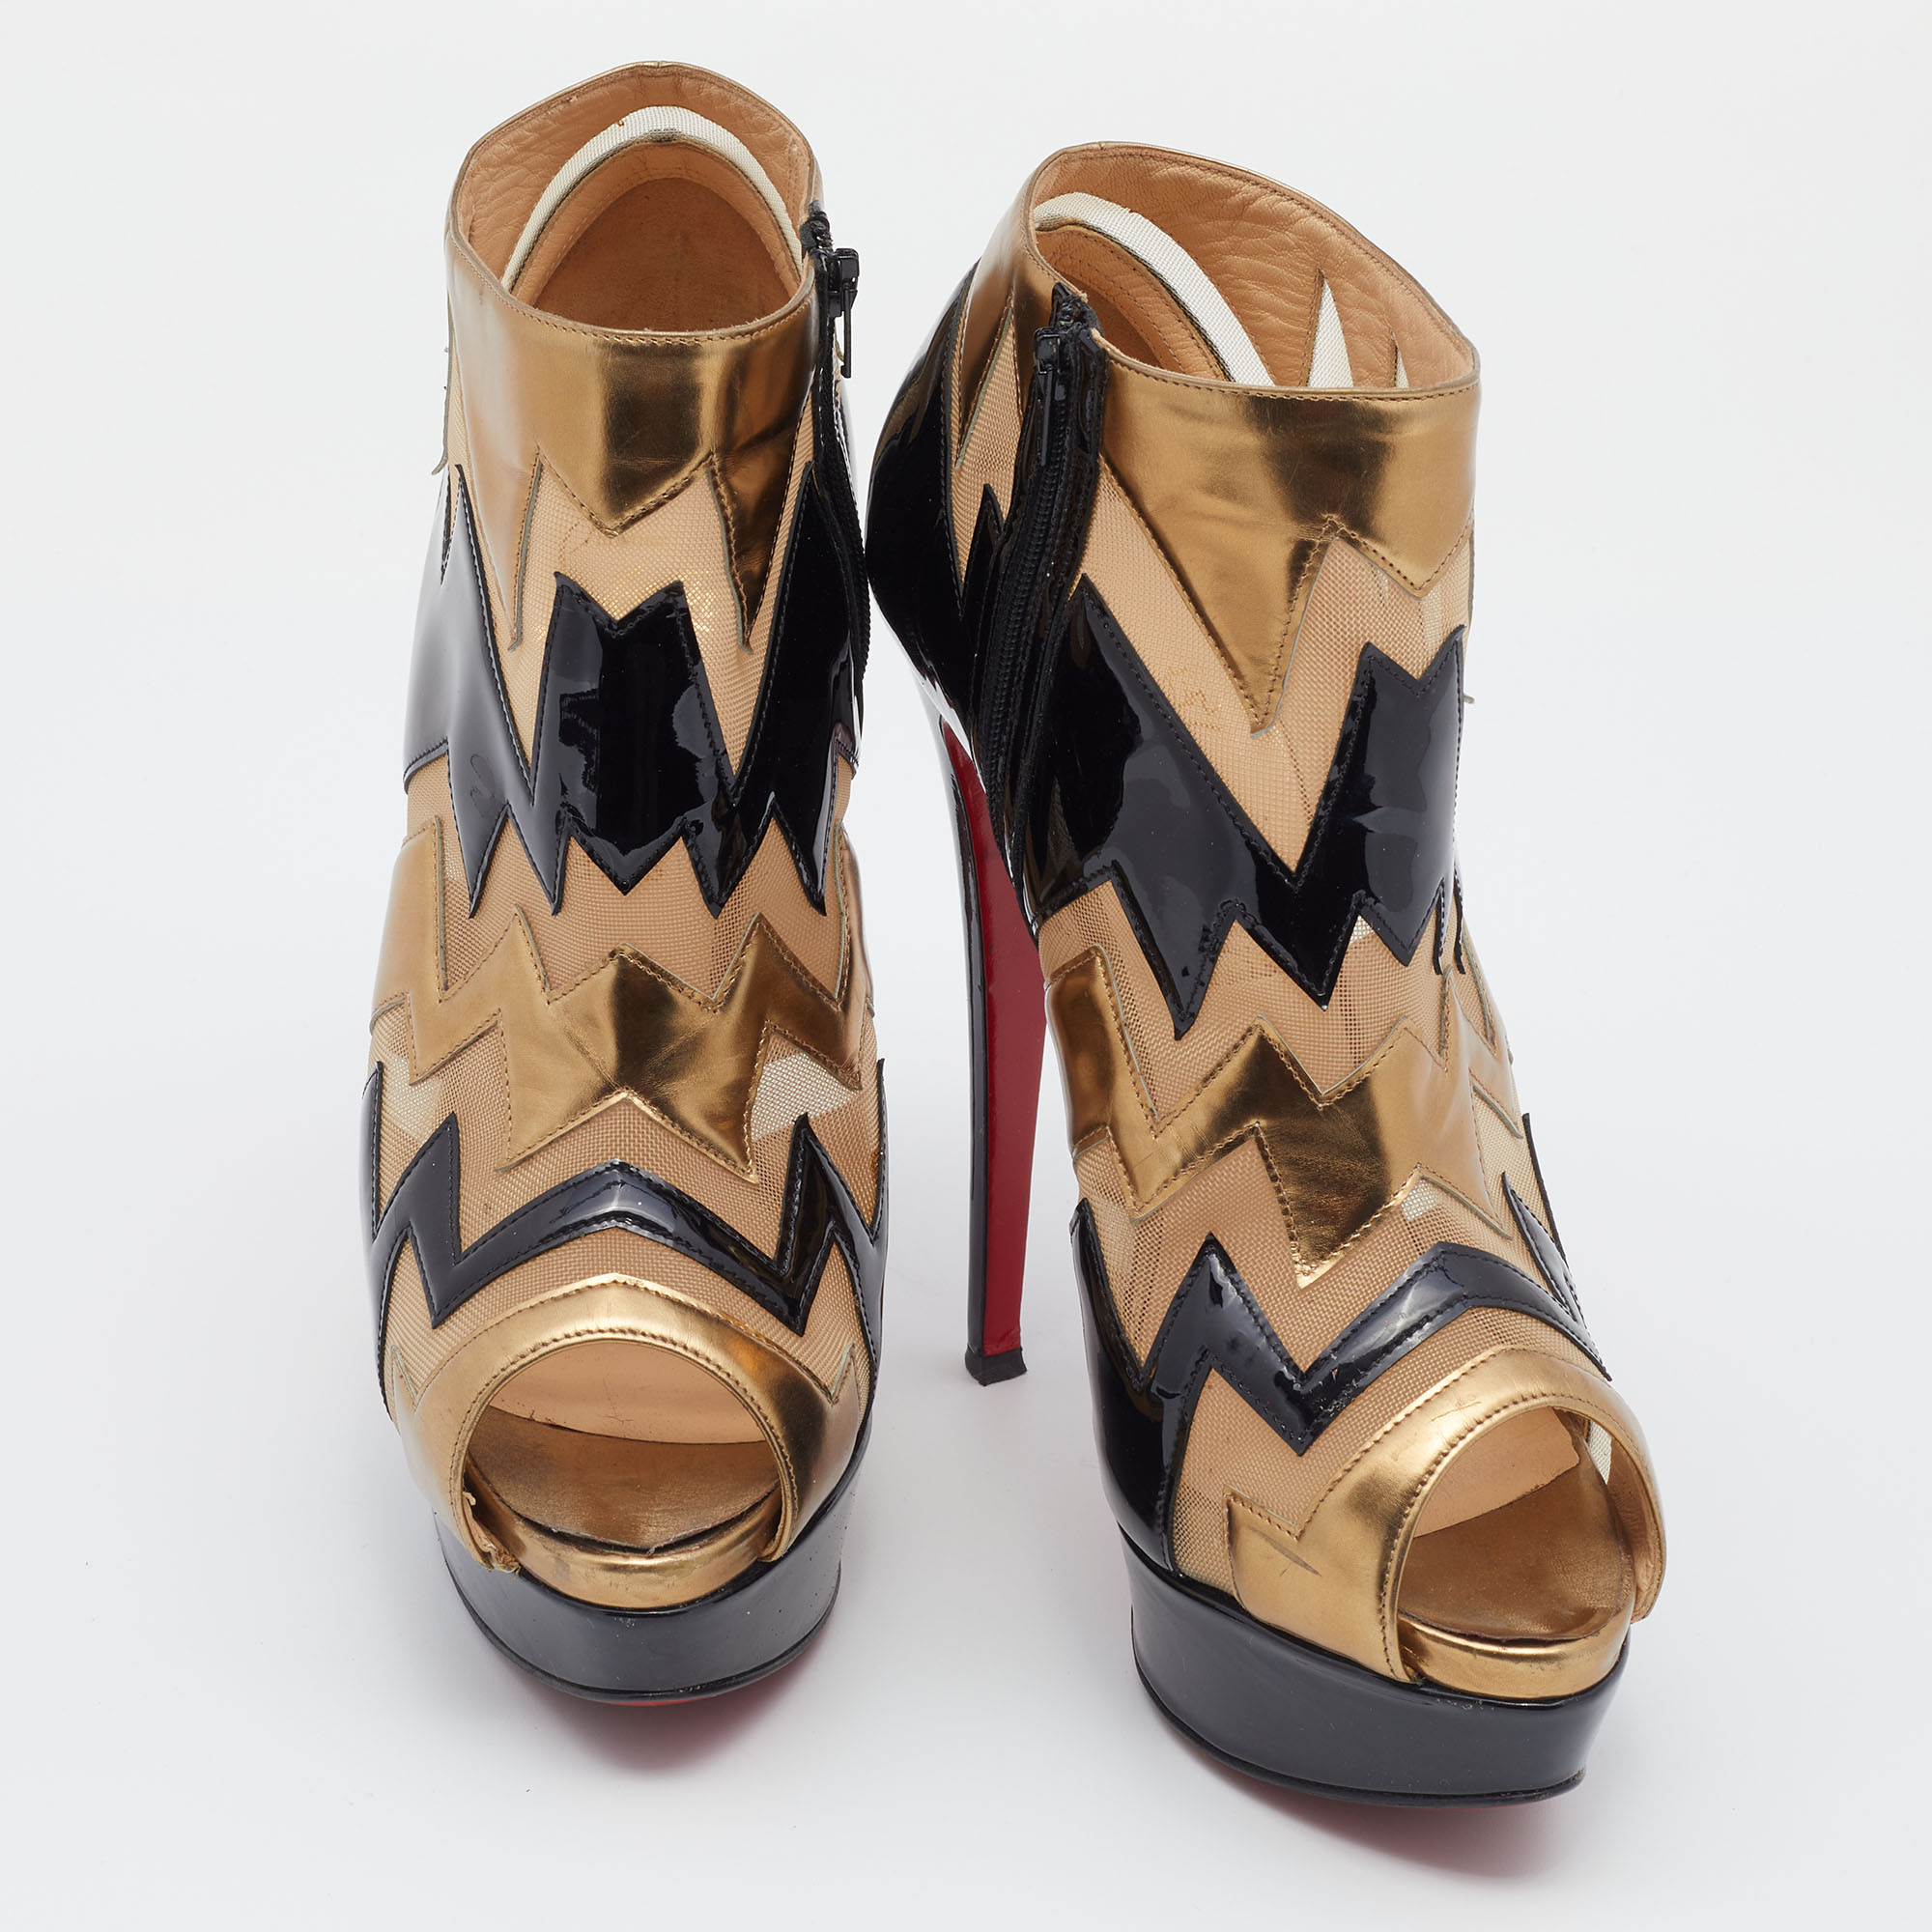 Christian Louboutin Multicolor Patent Leather And Mesh Peep Toe Booties Size 38.5